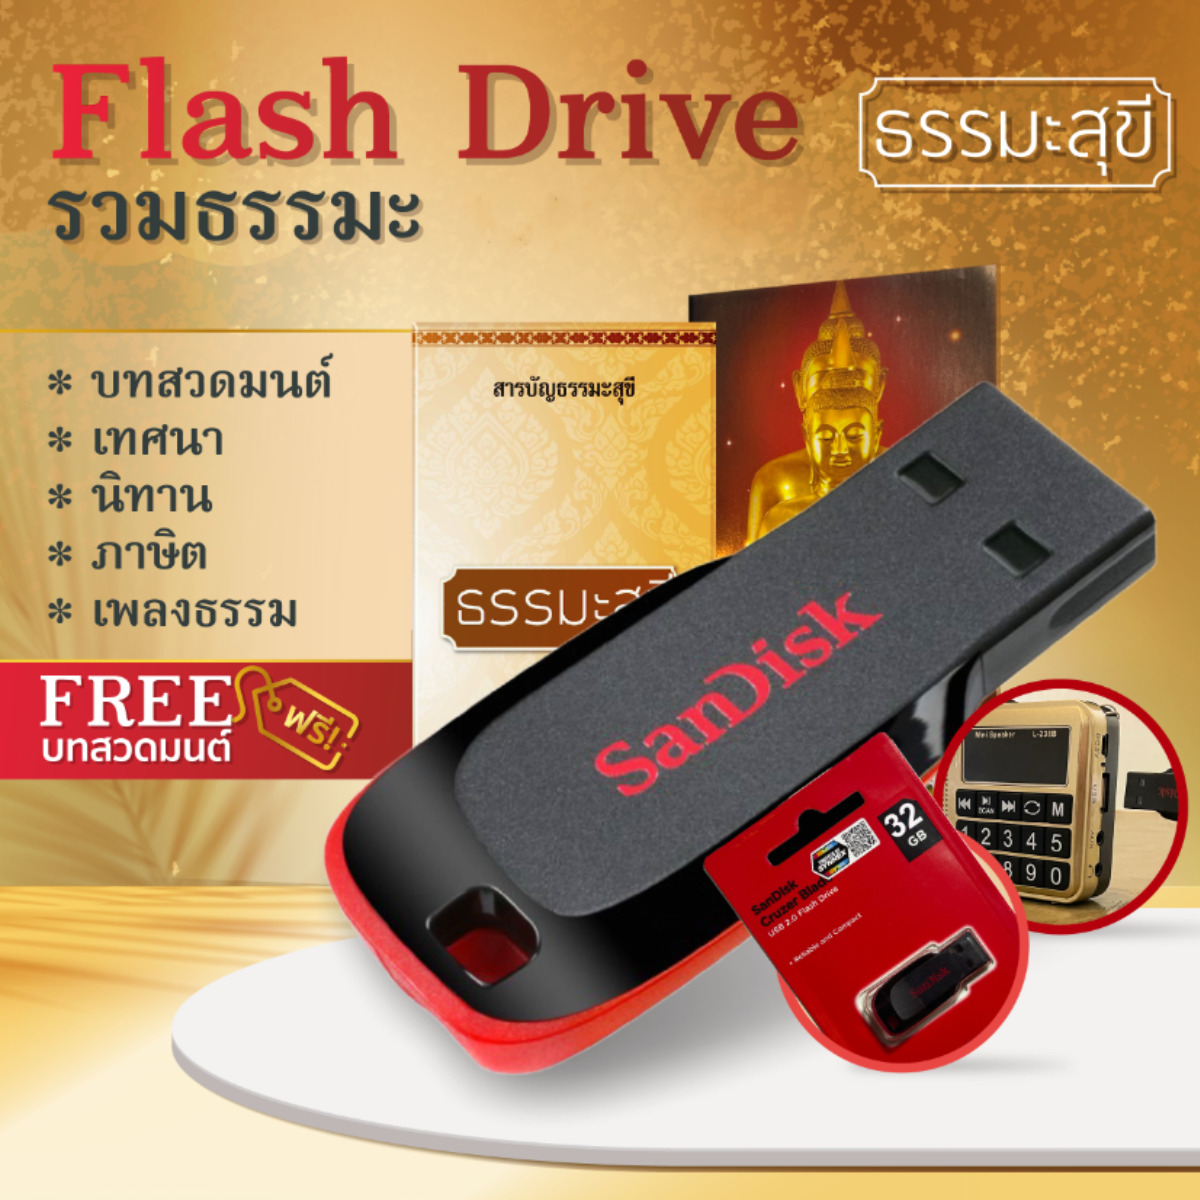 Flash Drive Authentic Includes Dhamma sermons From top monks Prayer 2,222 File